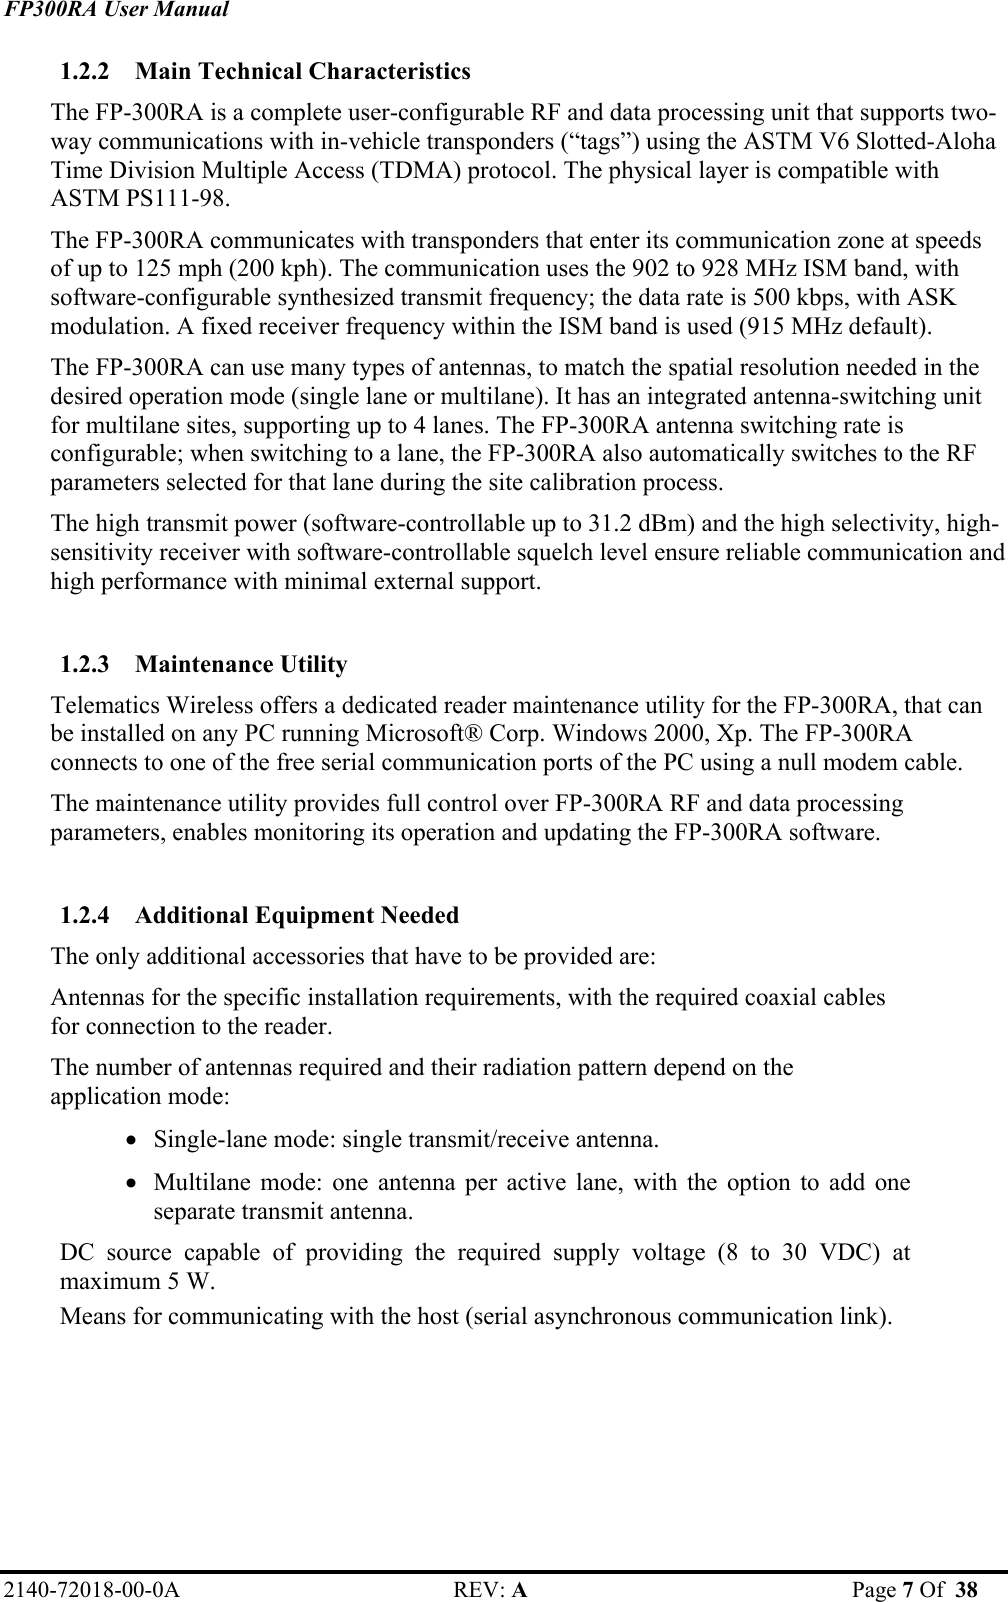 FP300RA User Manual 2140-72018-00-0A REV: A  Page 7 Of  38  1.2.2 Main Technical Characteristics The FP-300RA is a complete user-configurable RF and data processing unit that supports two-way communications with in-vehicle transponders (“tags”) using the ASTM V6 Slotted-Aloha Time Division Multiple Access (TDMA) protocol. The physical layer is compatible with ASTM PS111-98. The FP-300RA communicates with transponders that enter its communication zone at speeds of up to 125 mph (200 kph). The communication uses the 902 to 928 MHz ISM band, with software-configurable synthesized transmit frequency; the data rate is 500 kbps, with ASK modulation. A fixed receiver frequency within the ISM band is used (915 MHz default).  The FP-300RA can use many types of antennas, to match the spatial resolution needed in the desired operation mode (single lane or multilane). It has an integrated antenna-switching unit for multilane sites, supporting up to 4 lanes. The FP-300RA antenna switching rate is configurable; when switching to a lane, the FP-300RA also automatically switches to the RF parameters selected for that lane during the site calibration process. The high transmit power (software-controllable up to 31.2 dBm) and the high selectivity, high-sensitivity receiver with software-controllable squelch level ensure reliable communication and high performance with minimal external support.   1.2.3 Maintenance Utility Telematics Wireless offers a dedicated reader maintenance utility for the FP-300RA, that can be installed on any PC running Microsoft® Corp. Windows 2000, Xp. The FP-300RA connects to one of the free serial communication ports of the PC using a null modem cable. The maintenance utility provides full control over FP-300RA RF and data processing parameters, enables monitoring its operation and updating the FP-300RA software.  1.2.4 Additional Equipment Needed The only additional accessories that have to be provided are: Antennas for the specific installation requirements, with the required coaxial cables for connection to the reader. The number of antennas required and their radiation pattern depend on the application mode: • Single-lane mode: single transmit/receive antenna. • Multilane mode: one antenna per active lane, with the option to add one separate transmit antenna. DC source capable of providing the required supply voltage (8 to 30 VDC) at maximum 5 W. Means for communicating with the host (serial asynchronous communication link). 